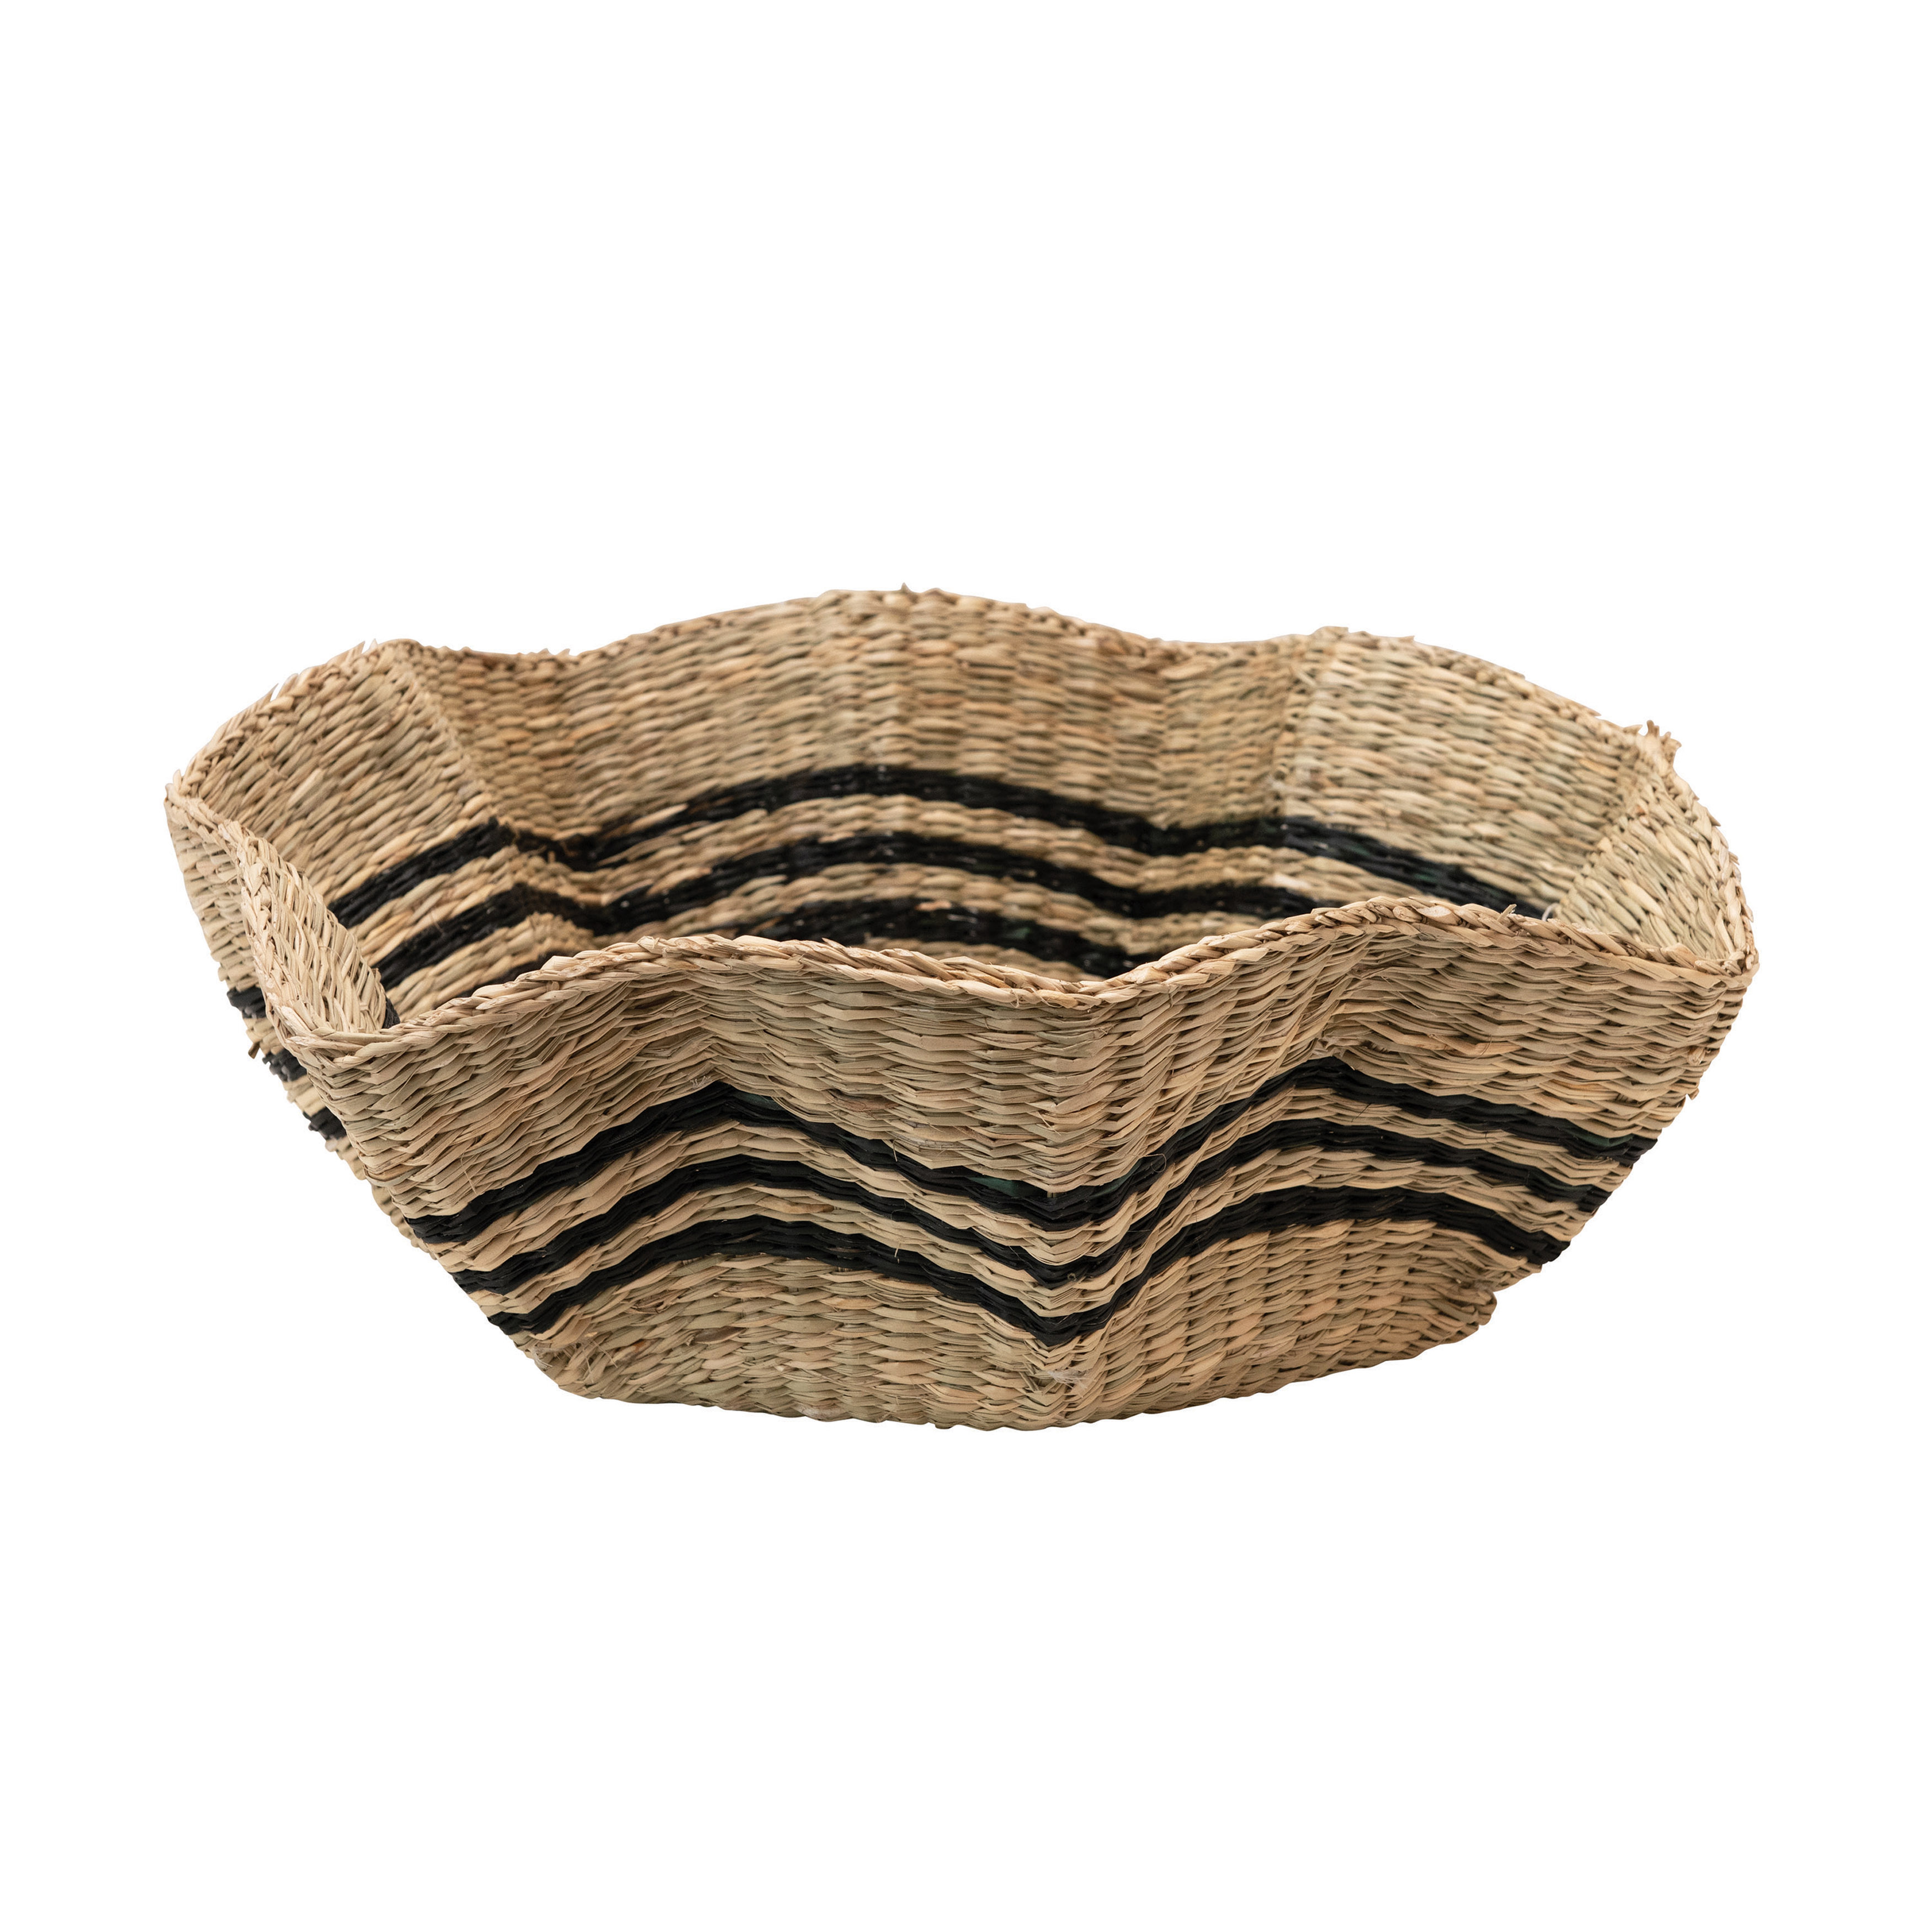 Hand-Woven Scalloped Seagrass Basket with Black Stripes - Nomad Home